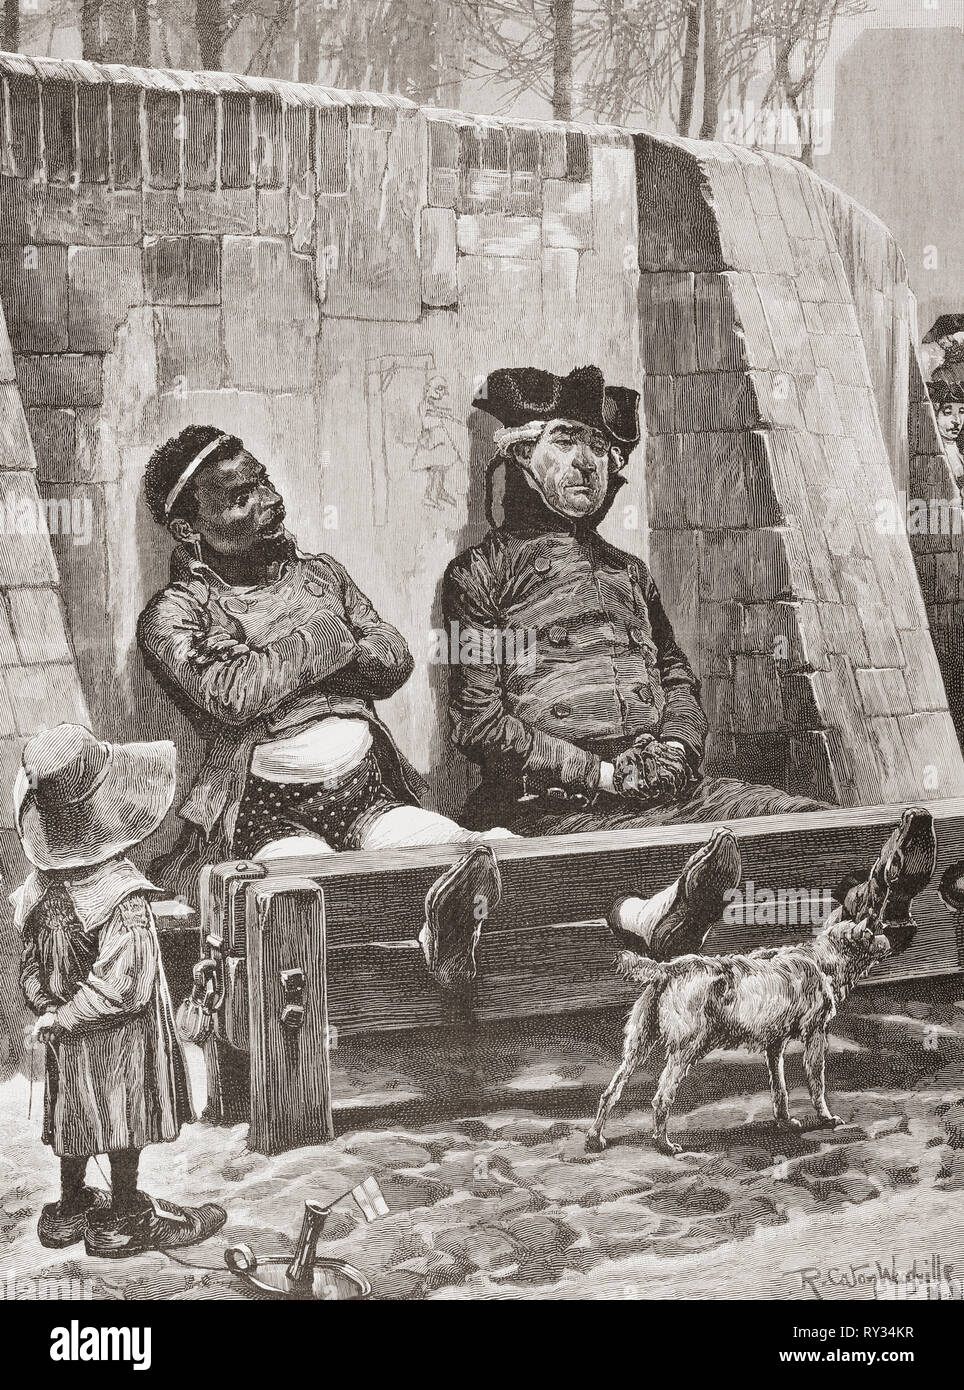 Two criminals in the stocks.   From Ilustracion Artistica, published 1887. Stock Photo